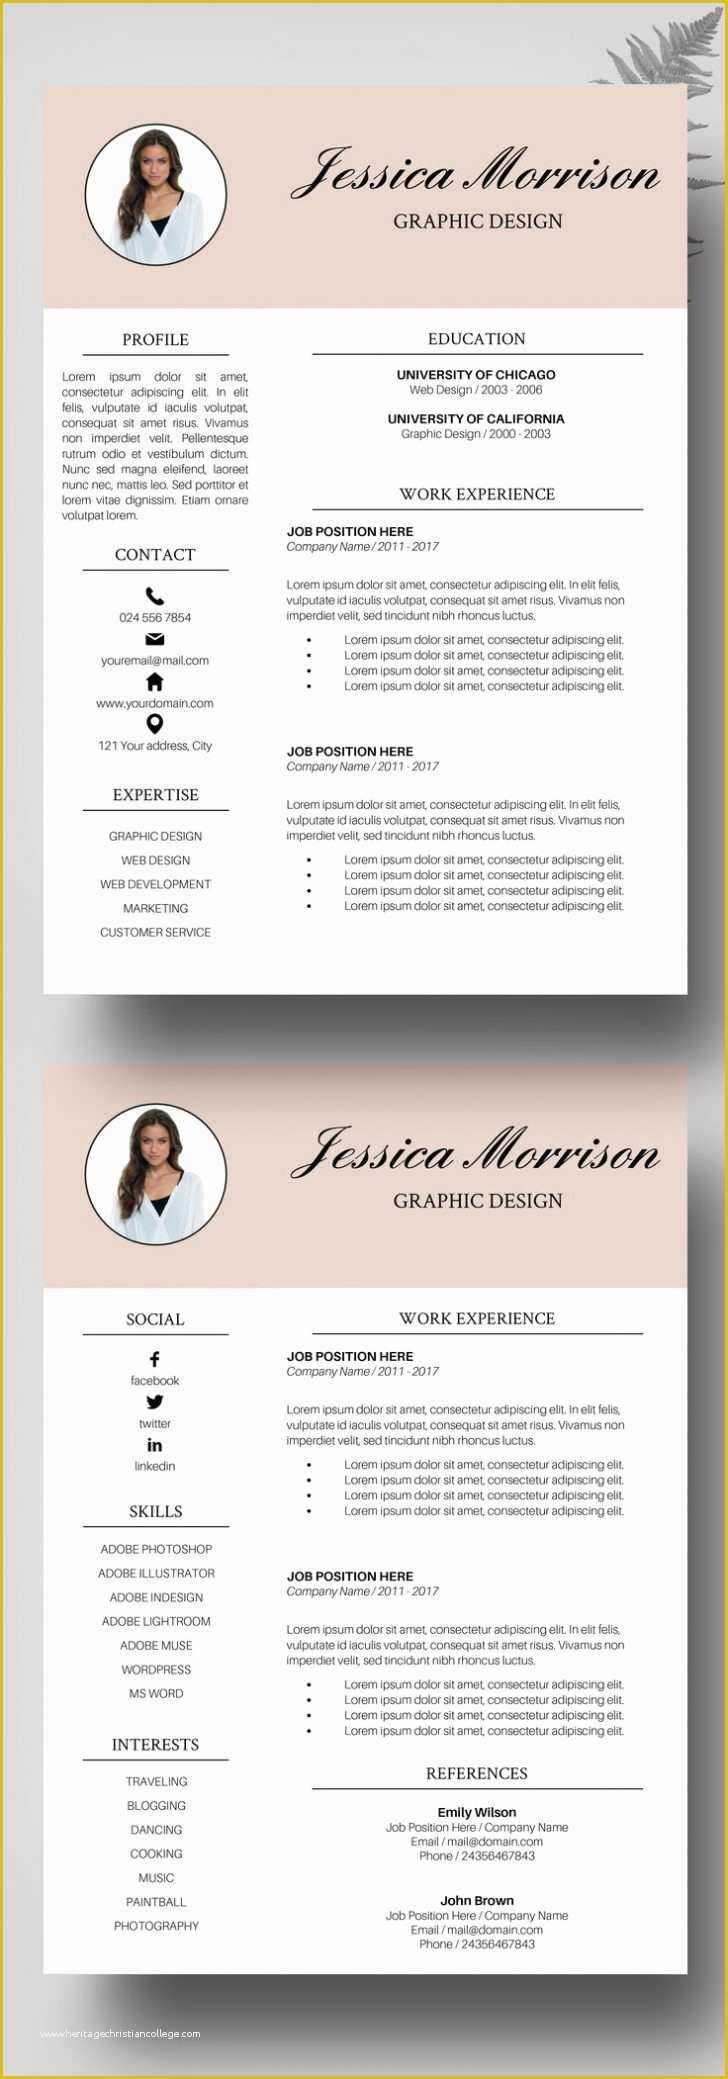 Creative Resume Templates Free Download Of Resume and Template Outstanding Free Creative Resume